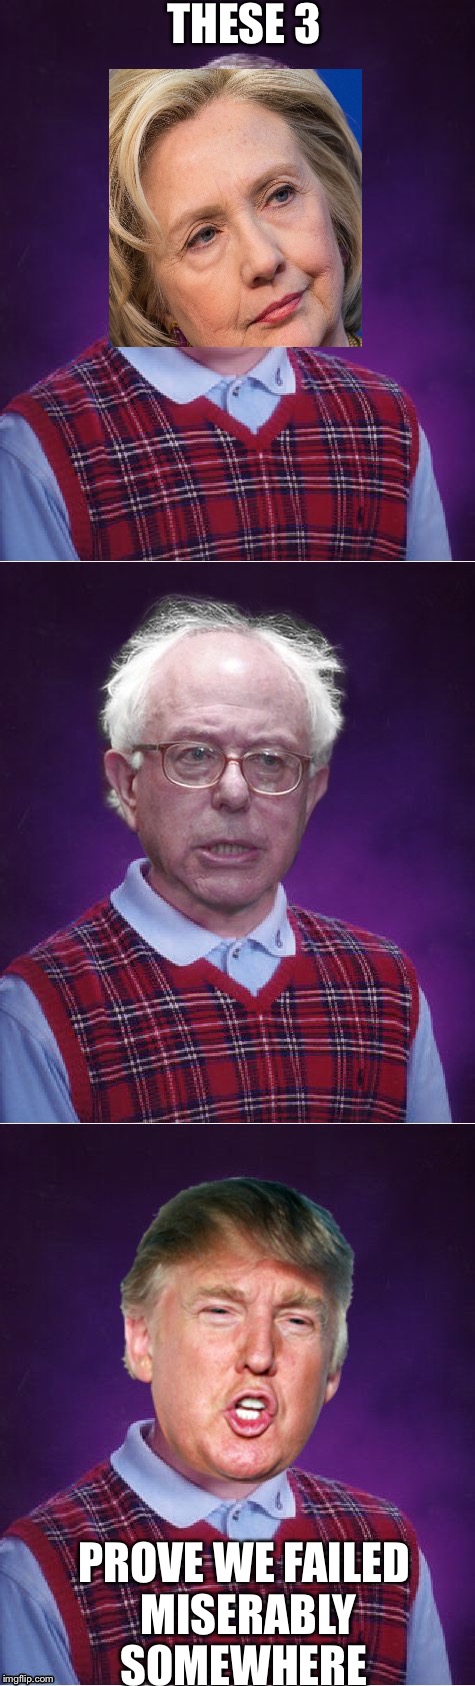 2016 election FAILURE  | THESE 3; PROVE WE FAILED MISERABLY SOMEWHERE | image tagged in memes,bad luck bernie,bad luck sanders,bad luck donald,bad luck clinton,bad luck hillary | made w/ Imgflip meme maker